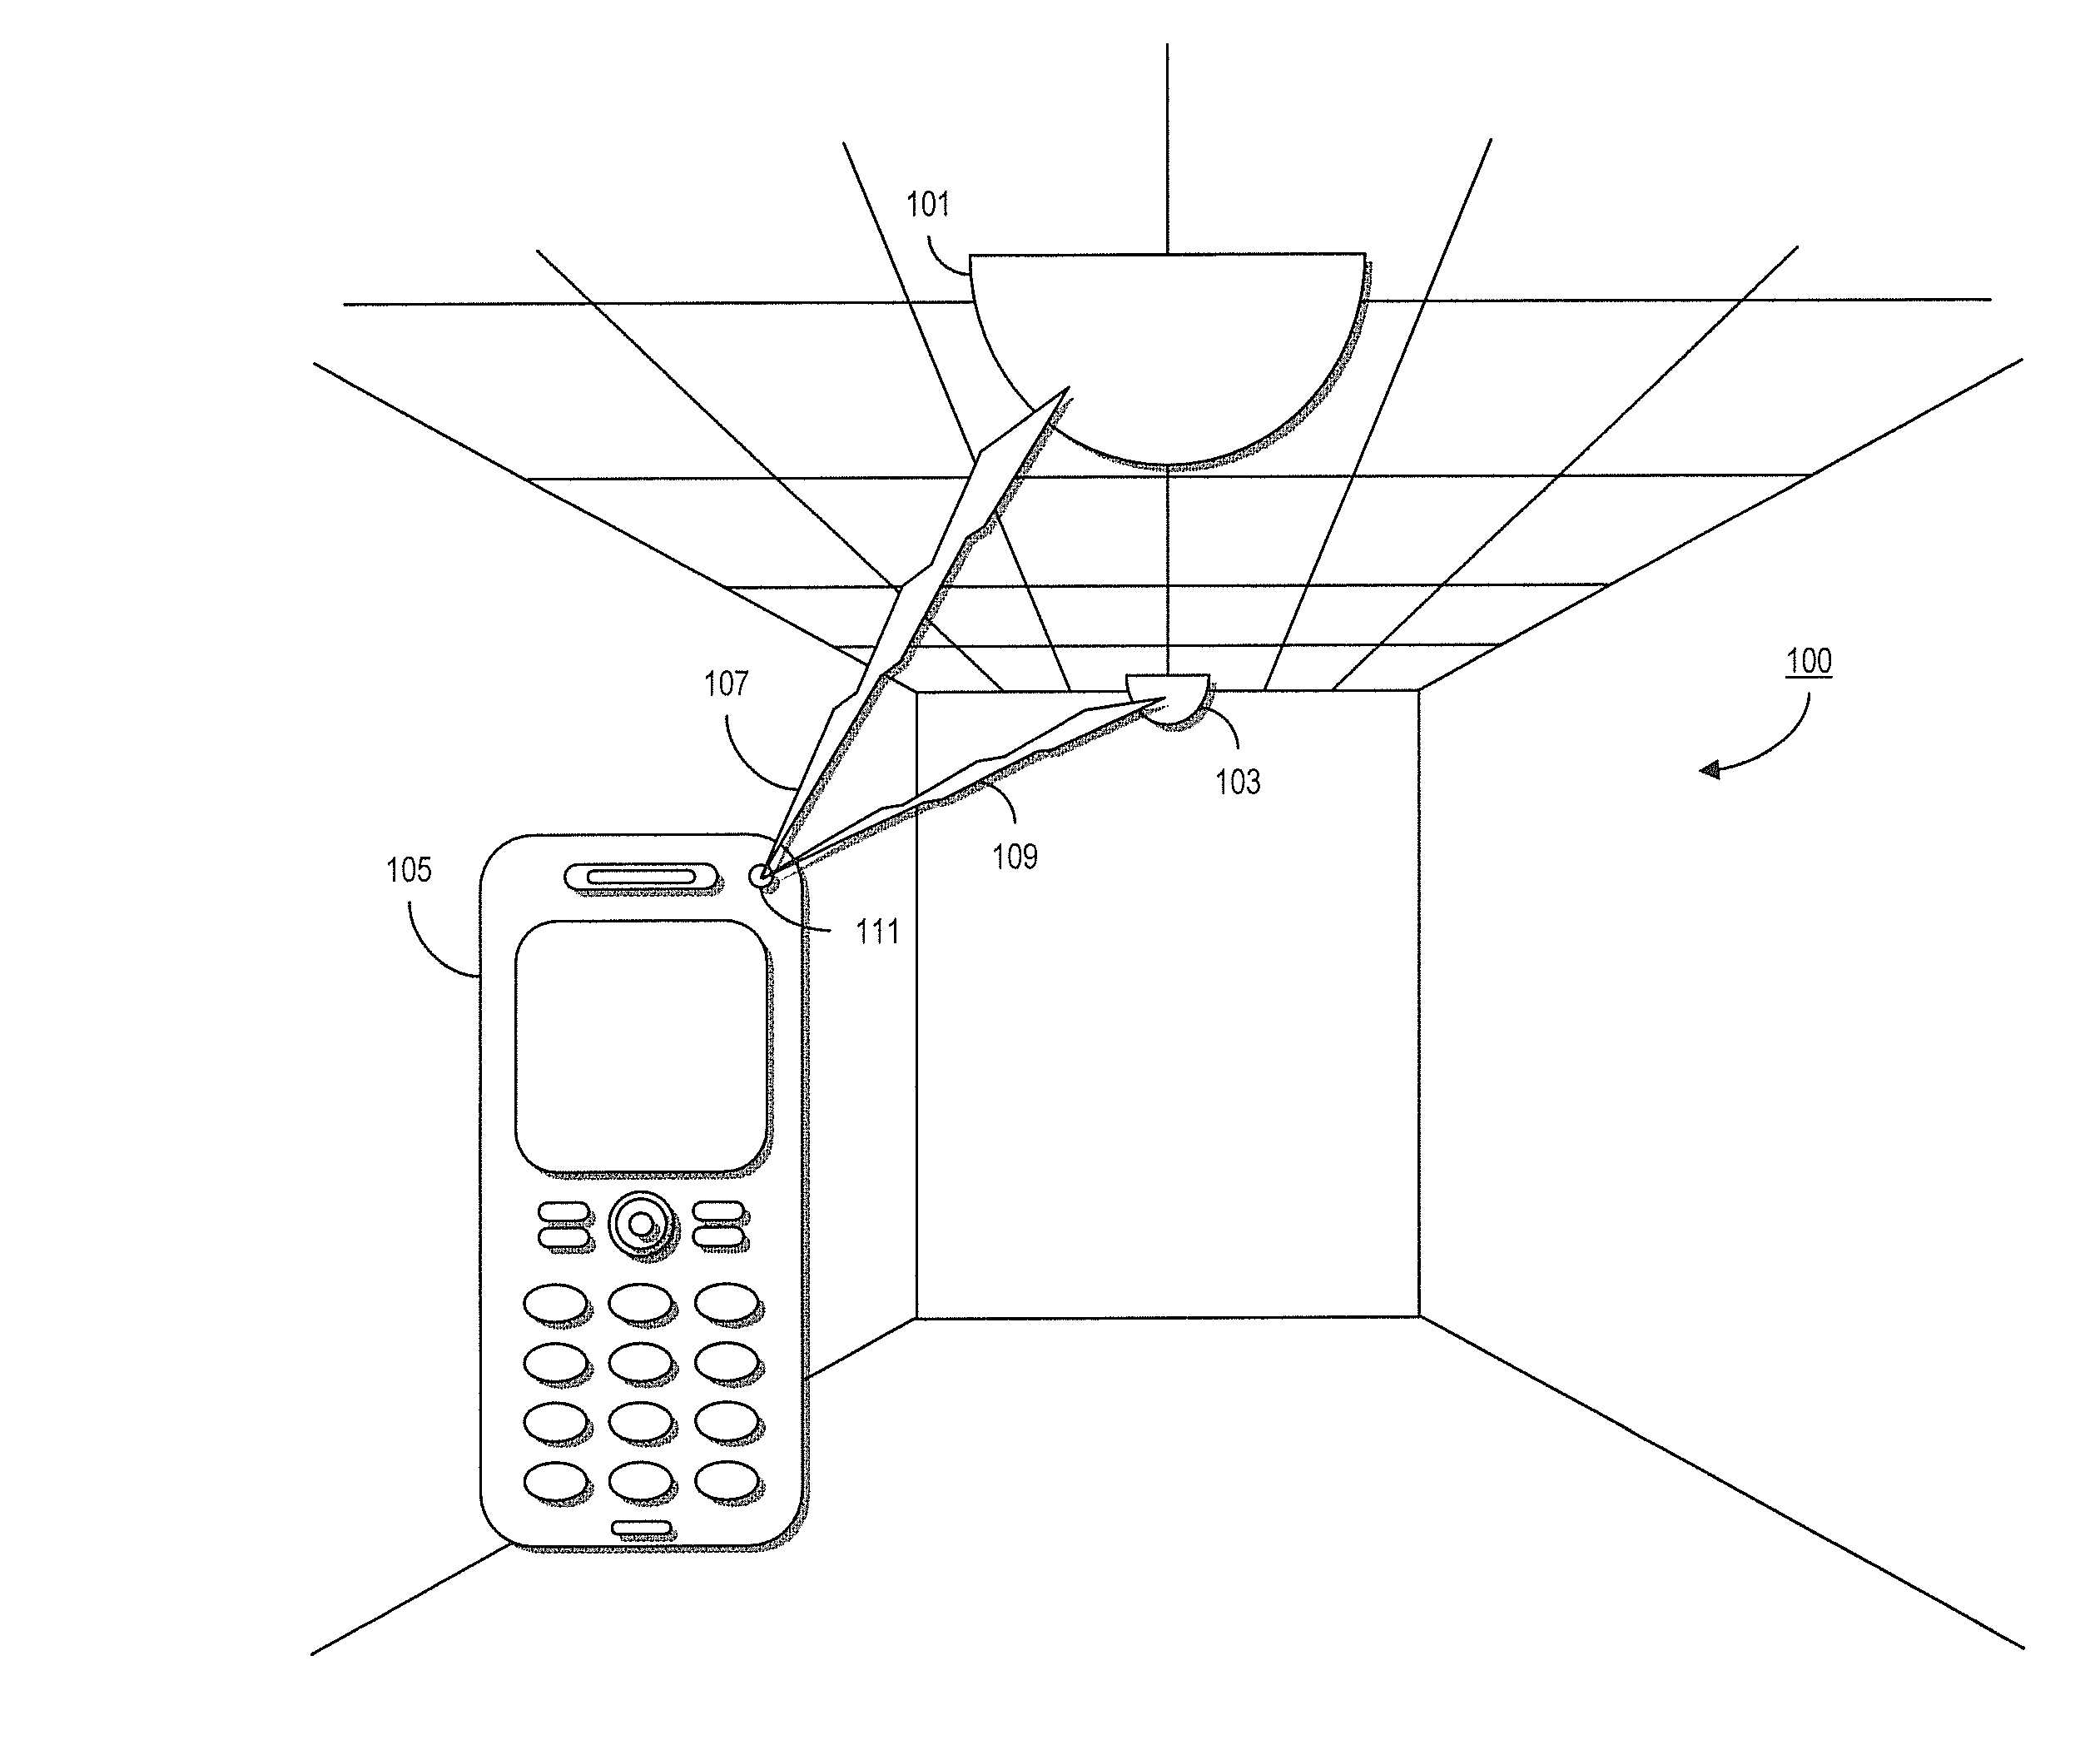 System and method for determining positioning information via modulated light